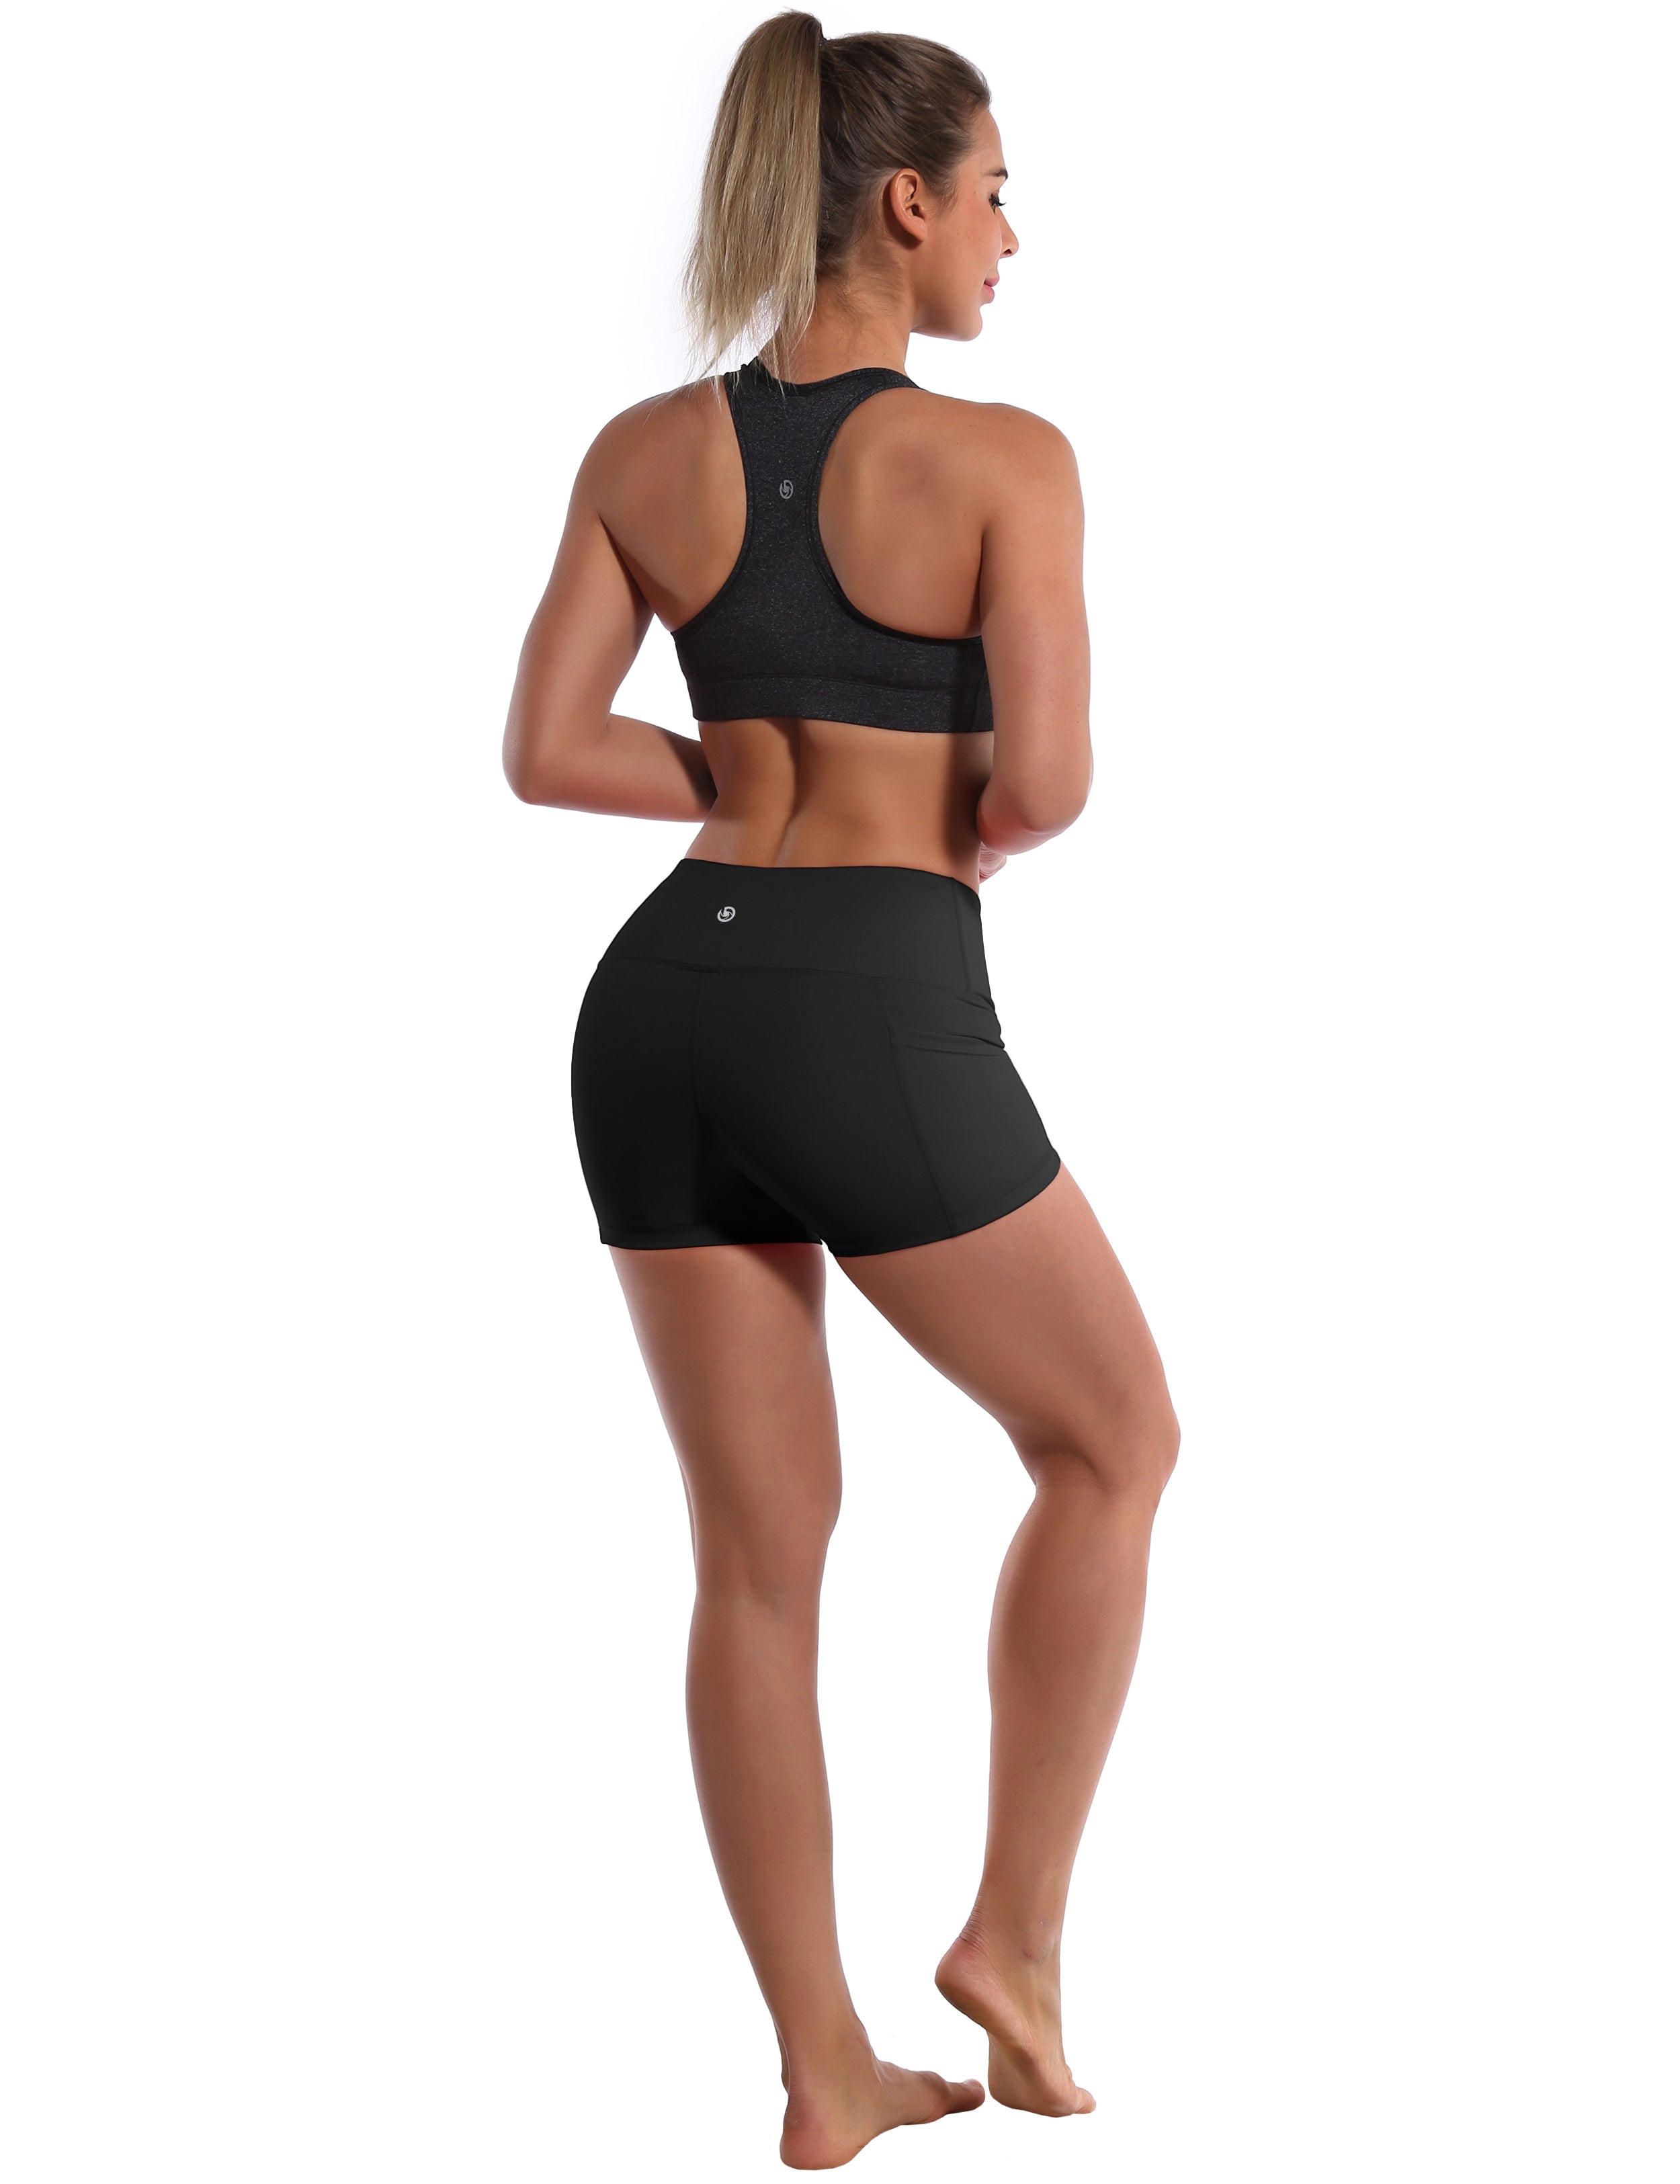 2.5" Side Pockets Golf Shorts black Sleek, soft, smooth and totally comfortable: our newest sexy style is here. Softest-ever fabric High elasticity High density 4-way stretch Fabric doesn't attract lint easily No see-through Moisture-wicking Machine wash 78% Polyester, 22% Spandex